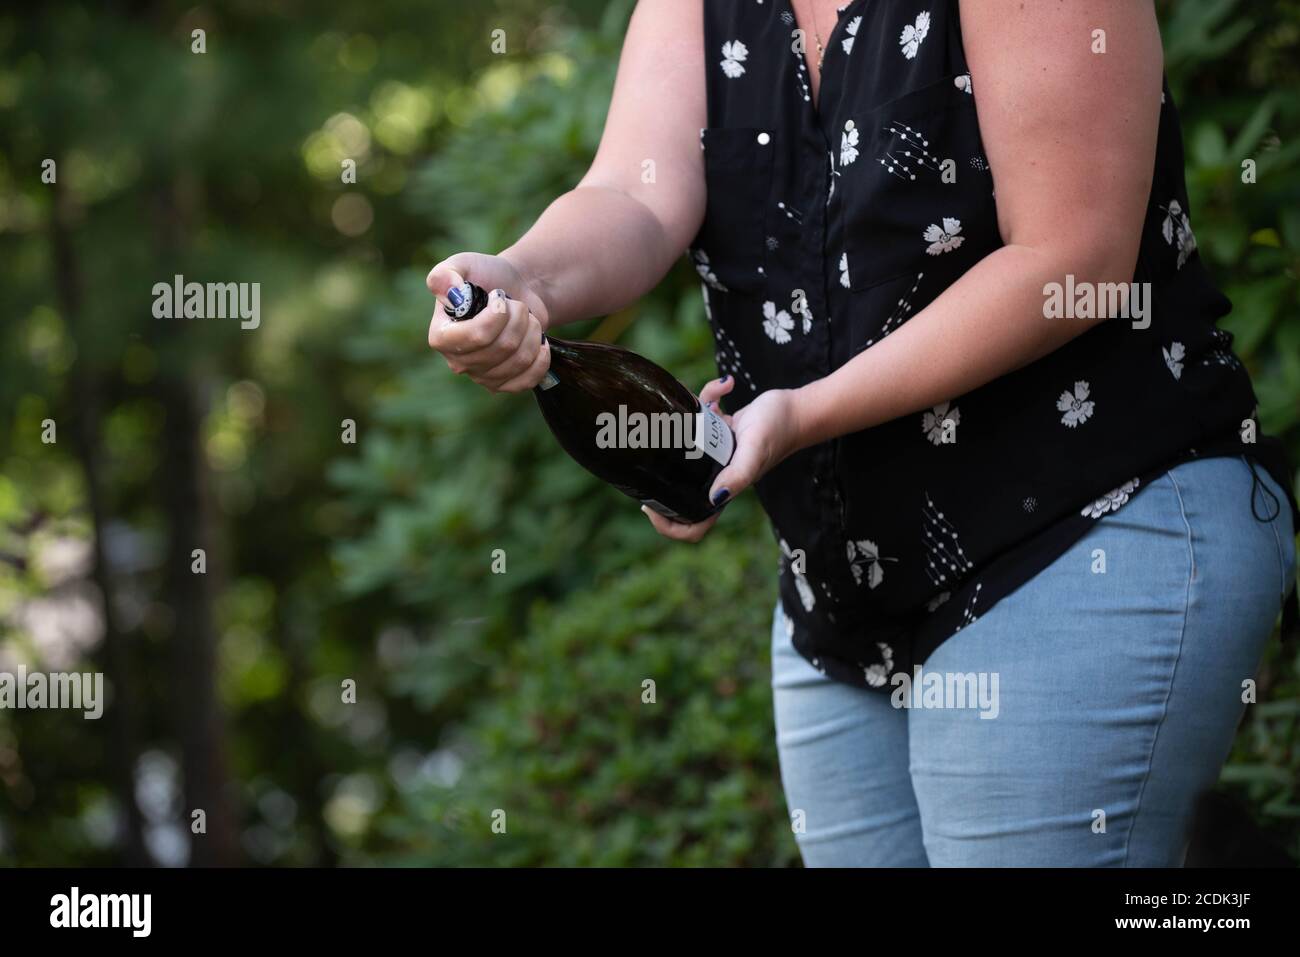 A woman pops a bottle of champagne open at a graduation party Stock Photo